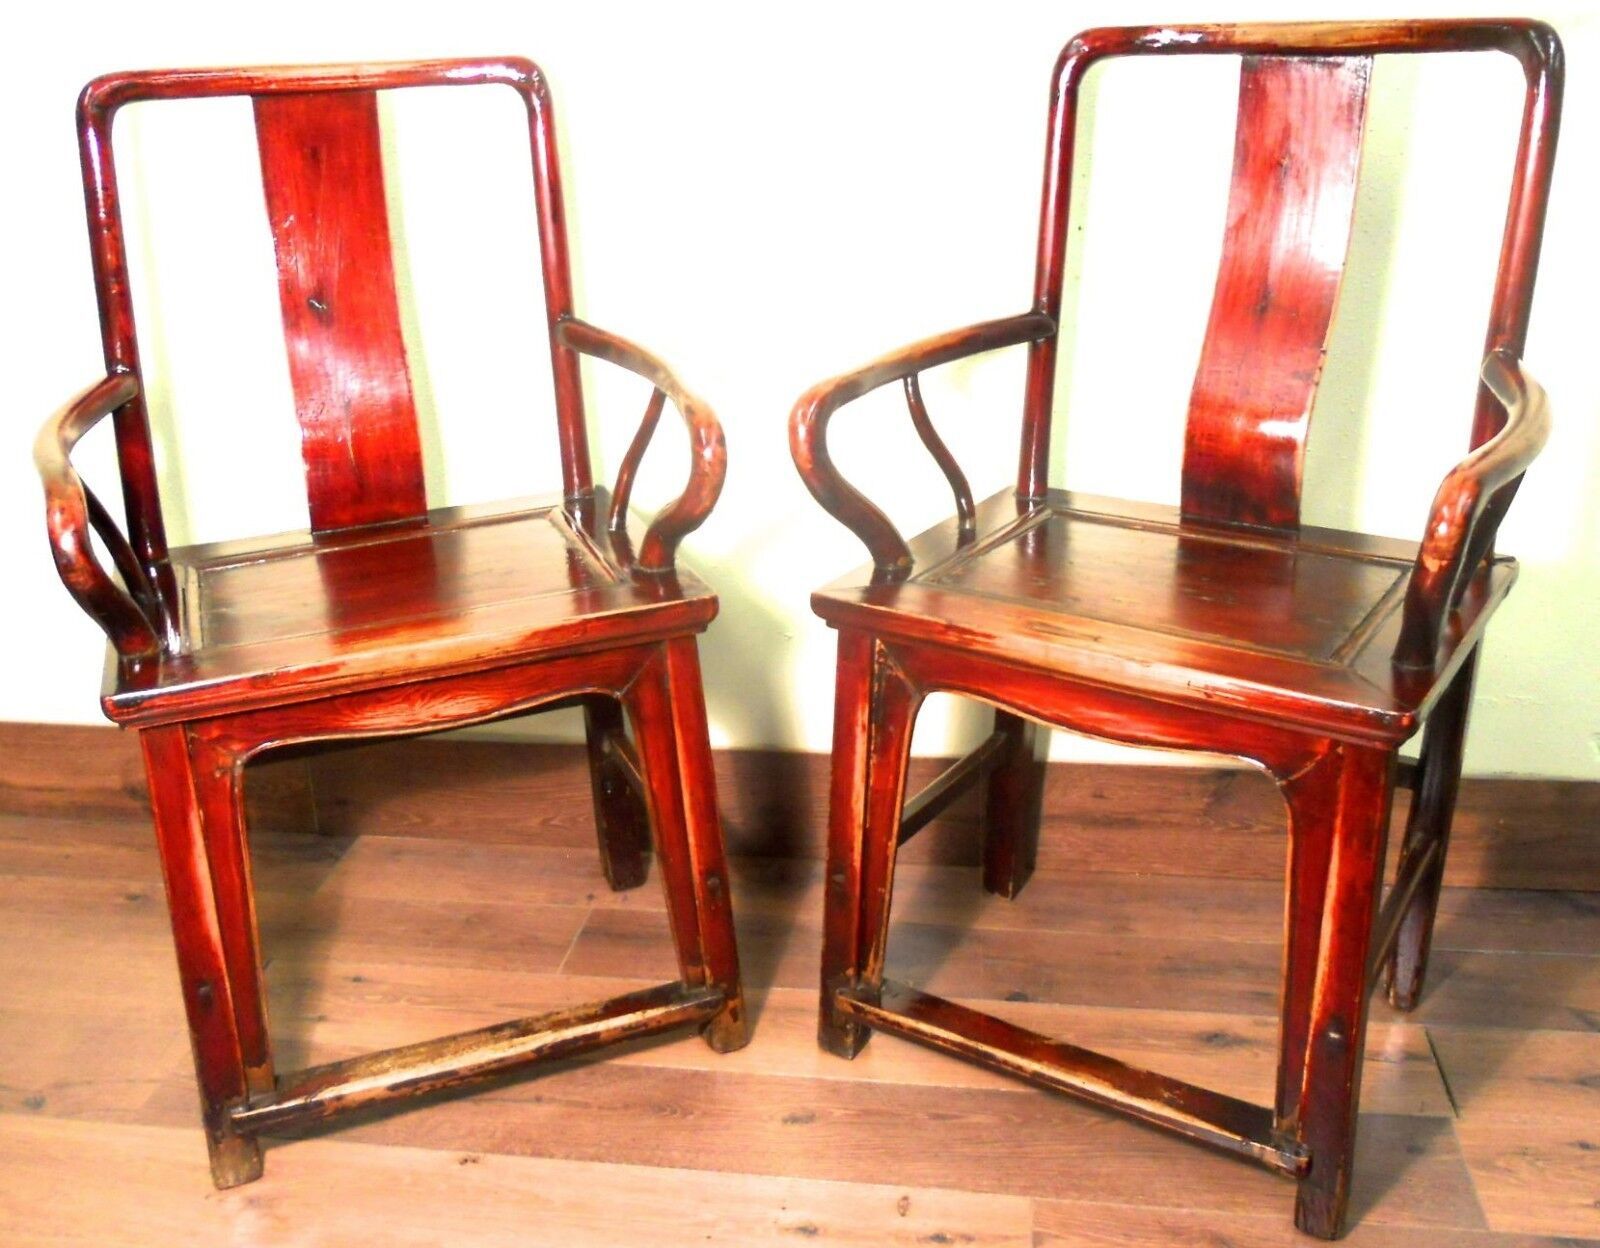 Primary image for Antique Chinese Ming Arm Chairs (5882) (Pair), Circa 1800-1849